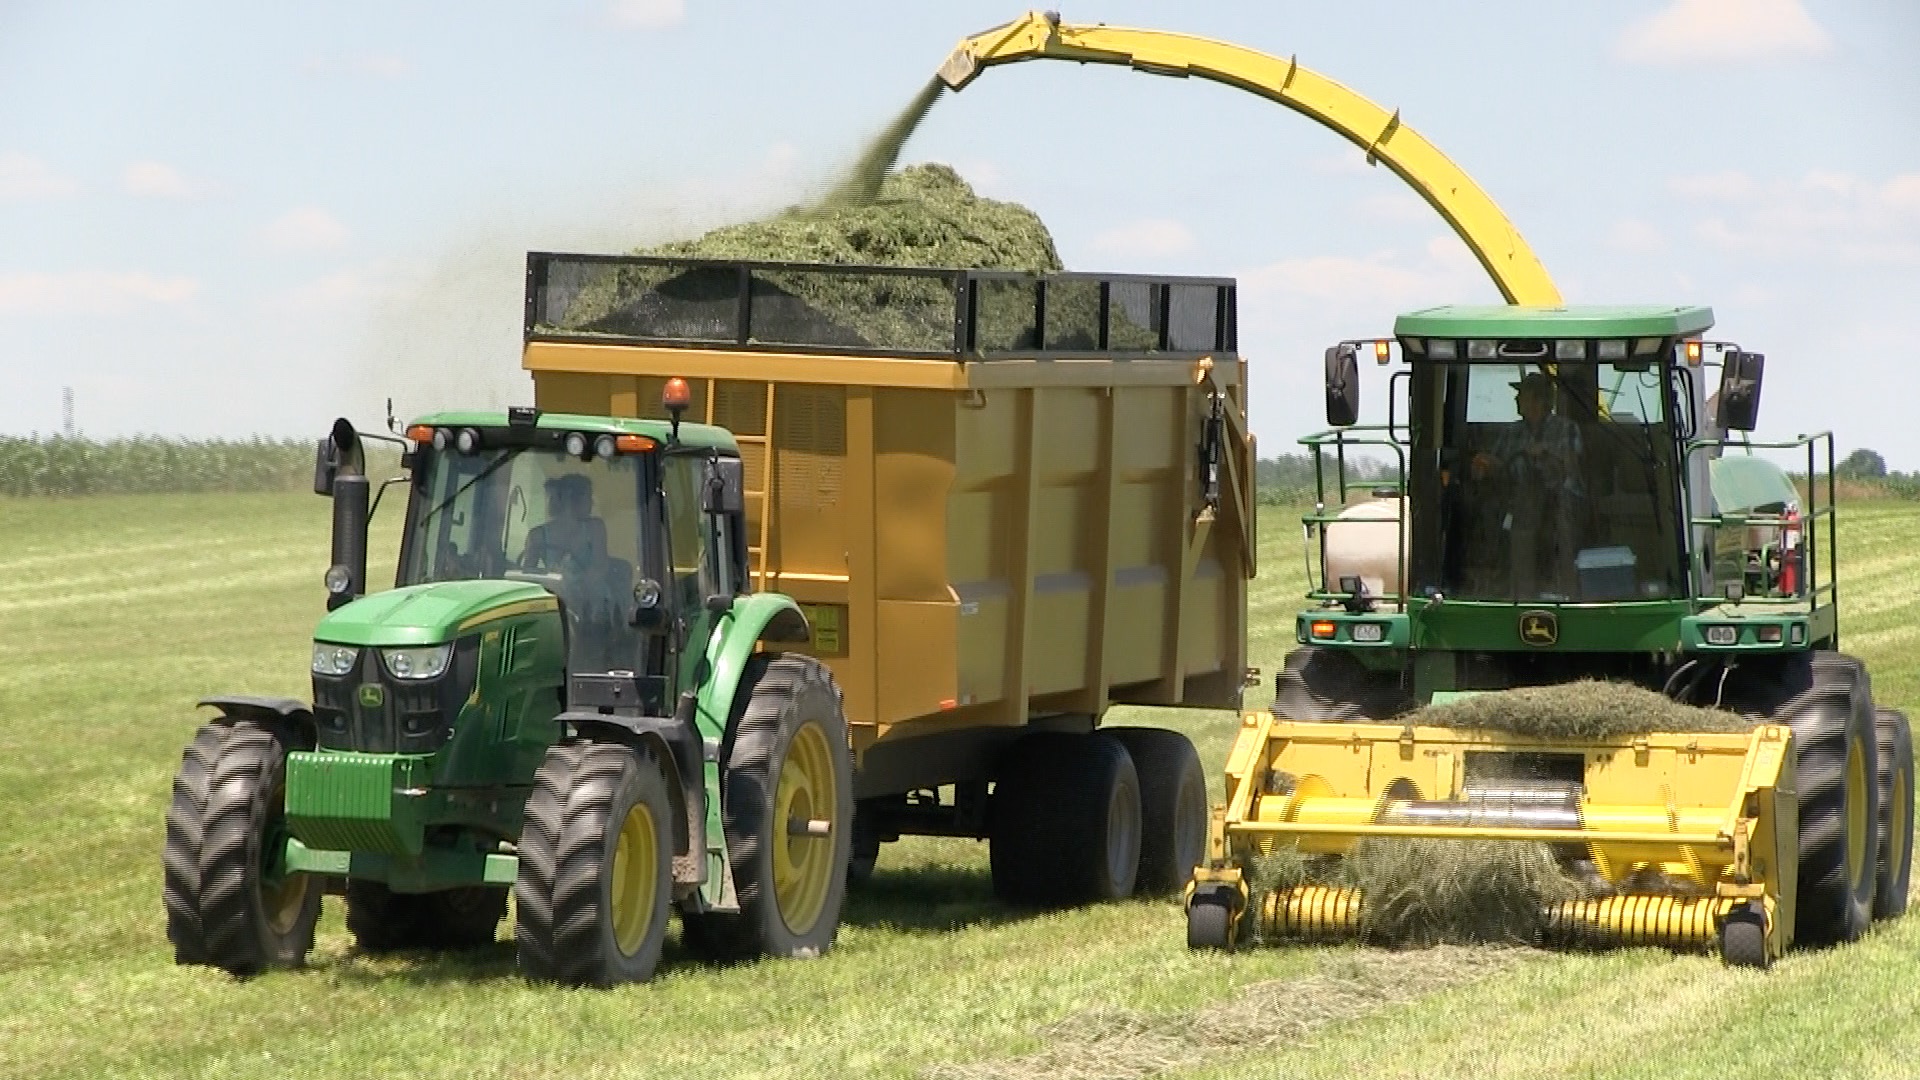 An image of the 20 ton dumper trailer getting hay silage loaded into it